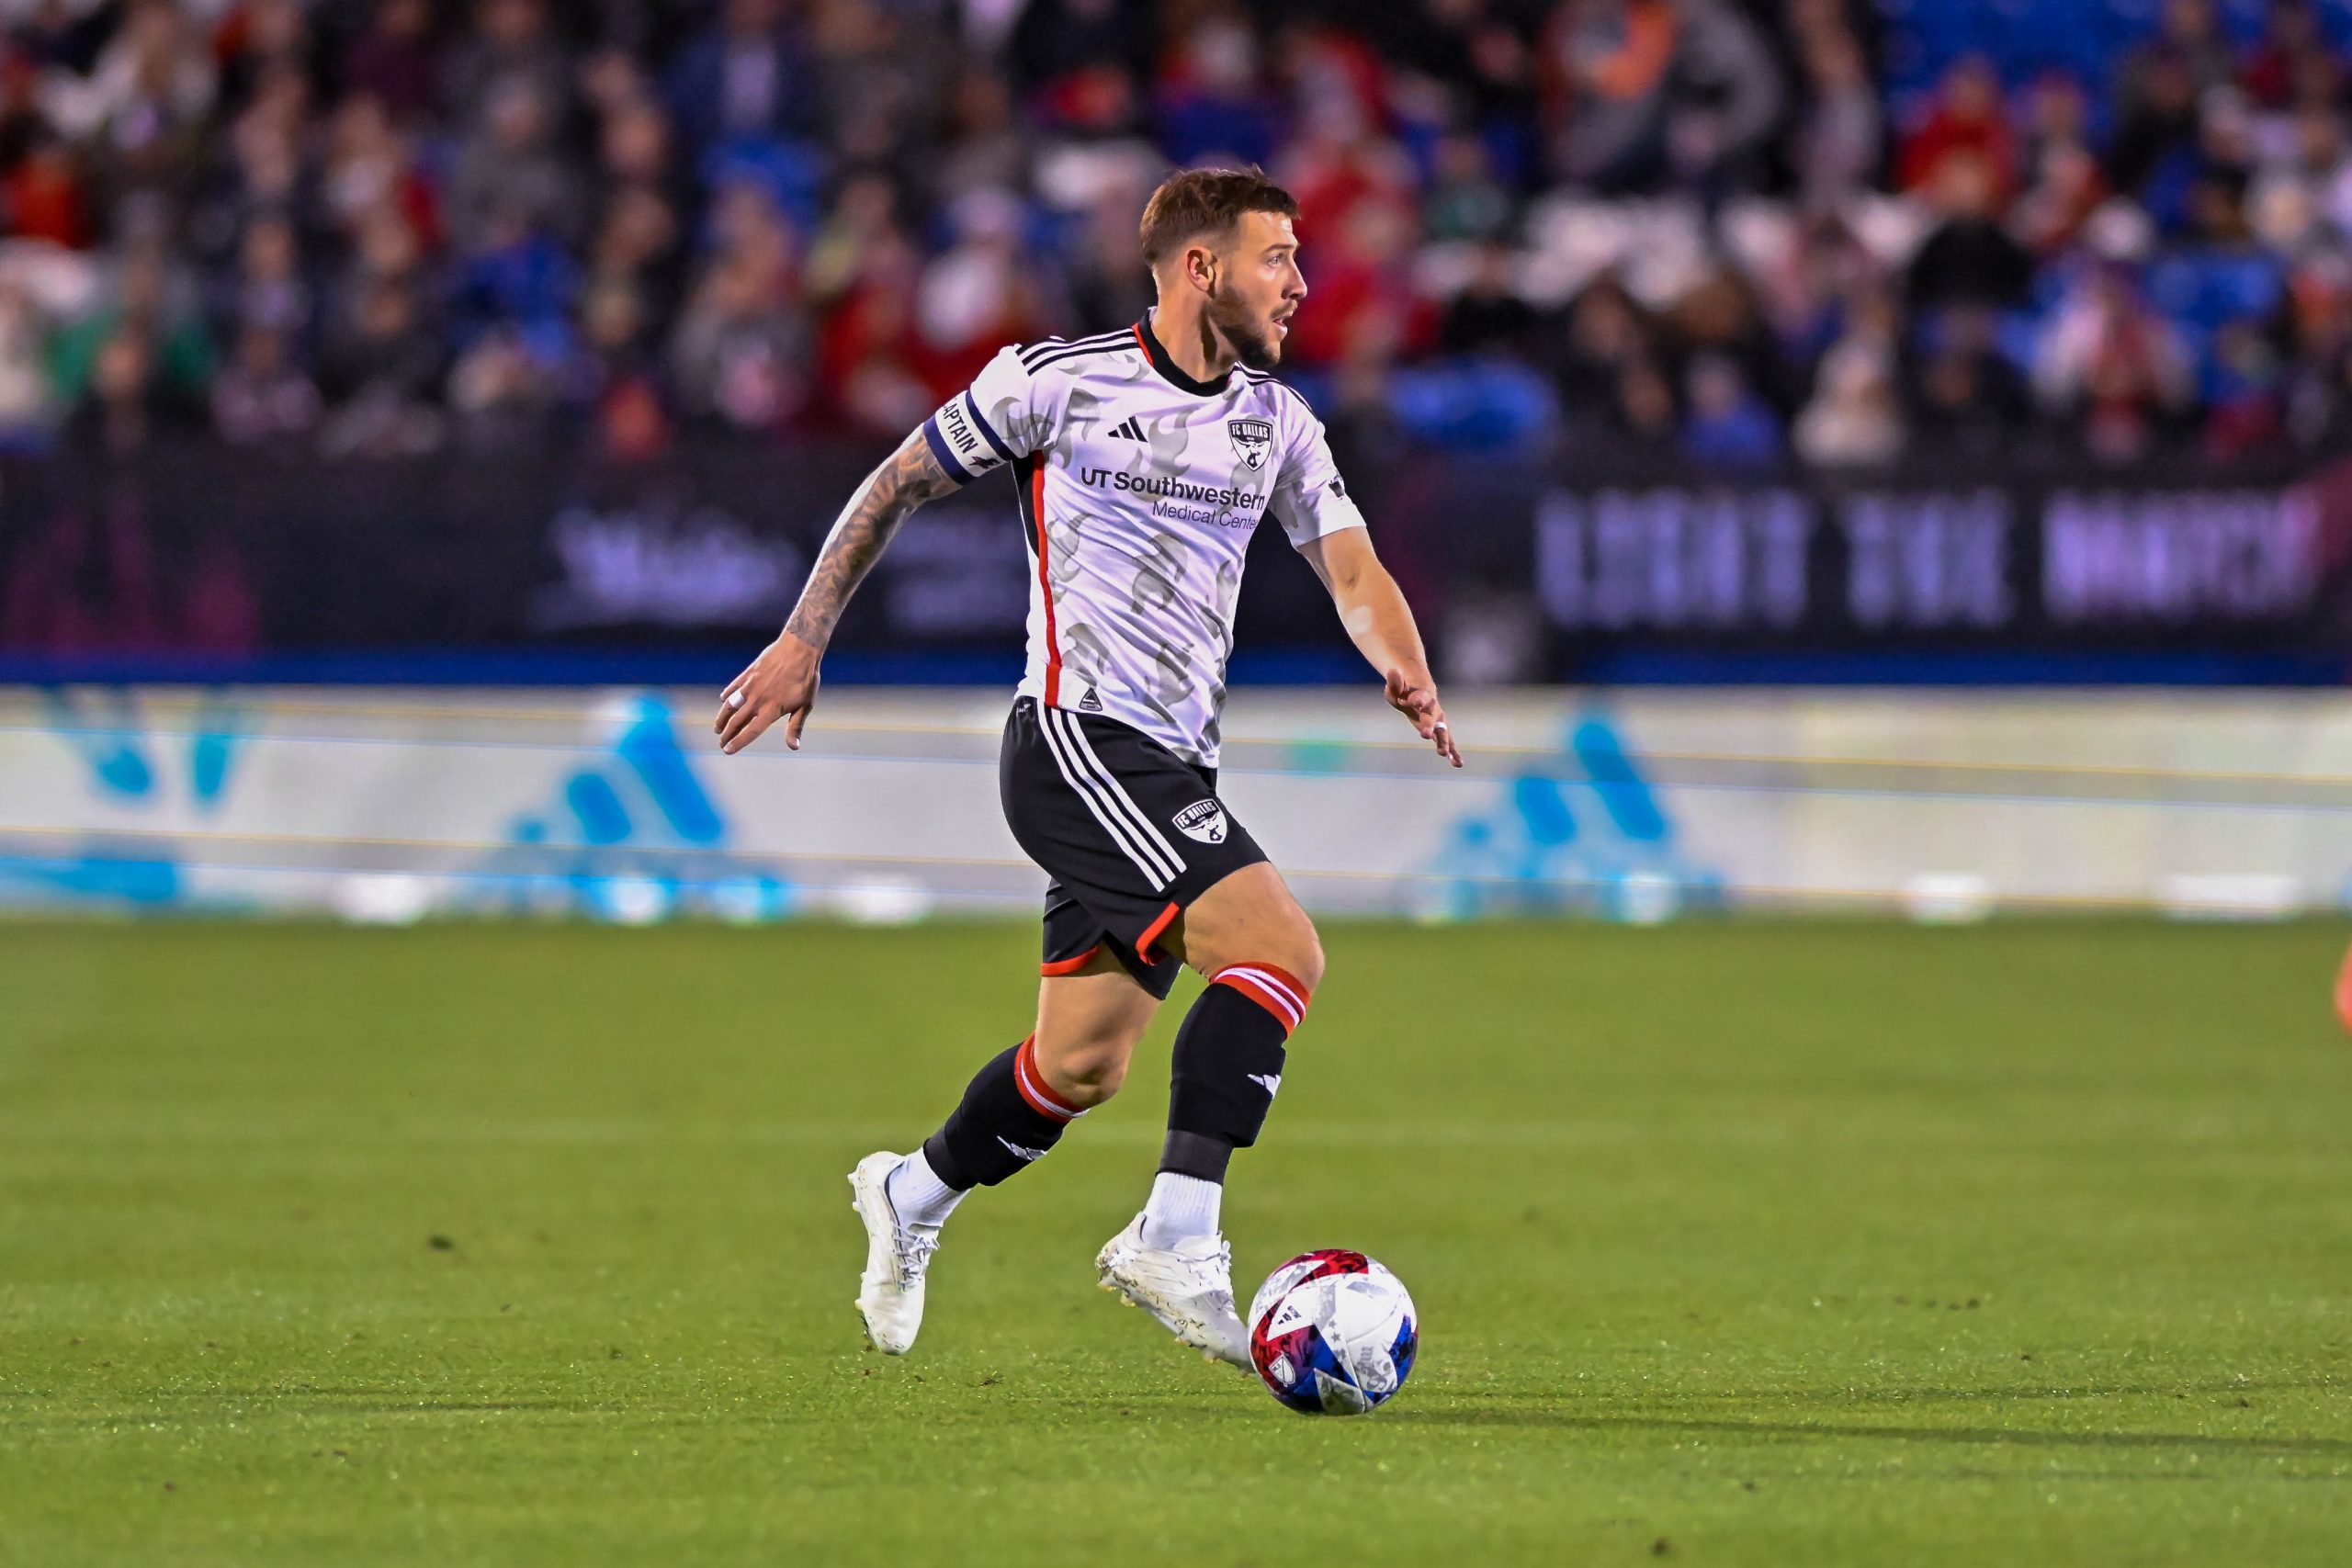 Paul Arriola scans the field in the MLS match against Sporting KC on Saturday, March 18, 2023, at Toyota Stadium. (Daniel McCullough, 3rd Degree)